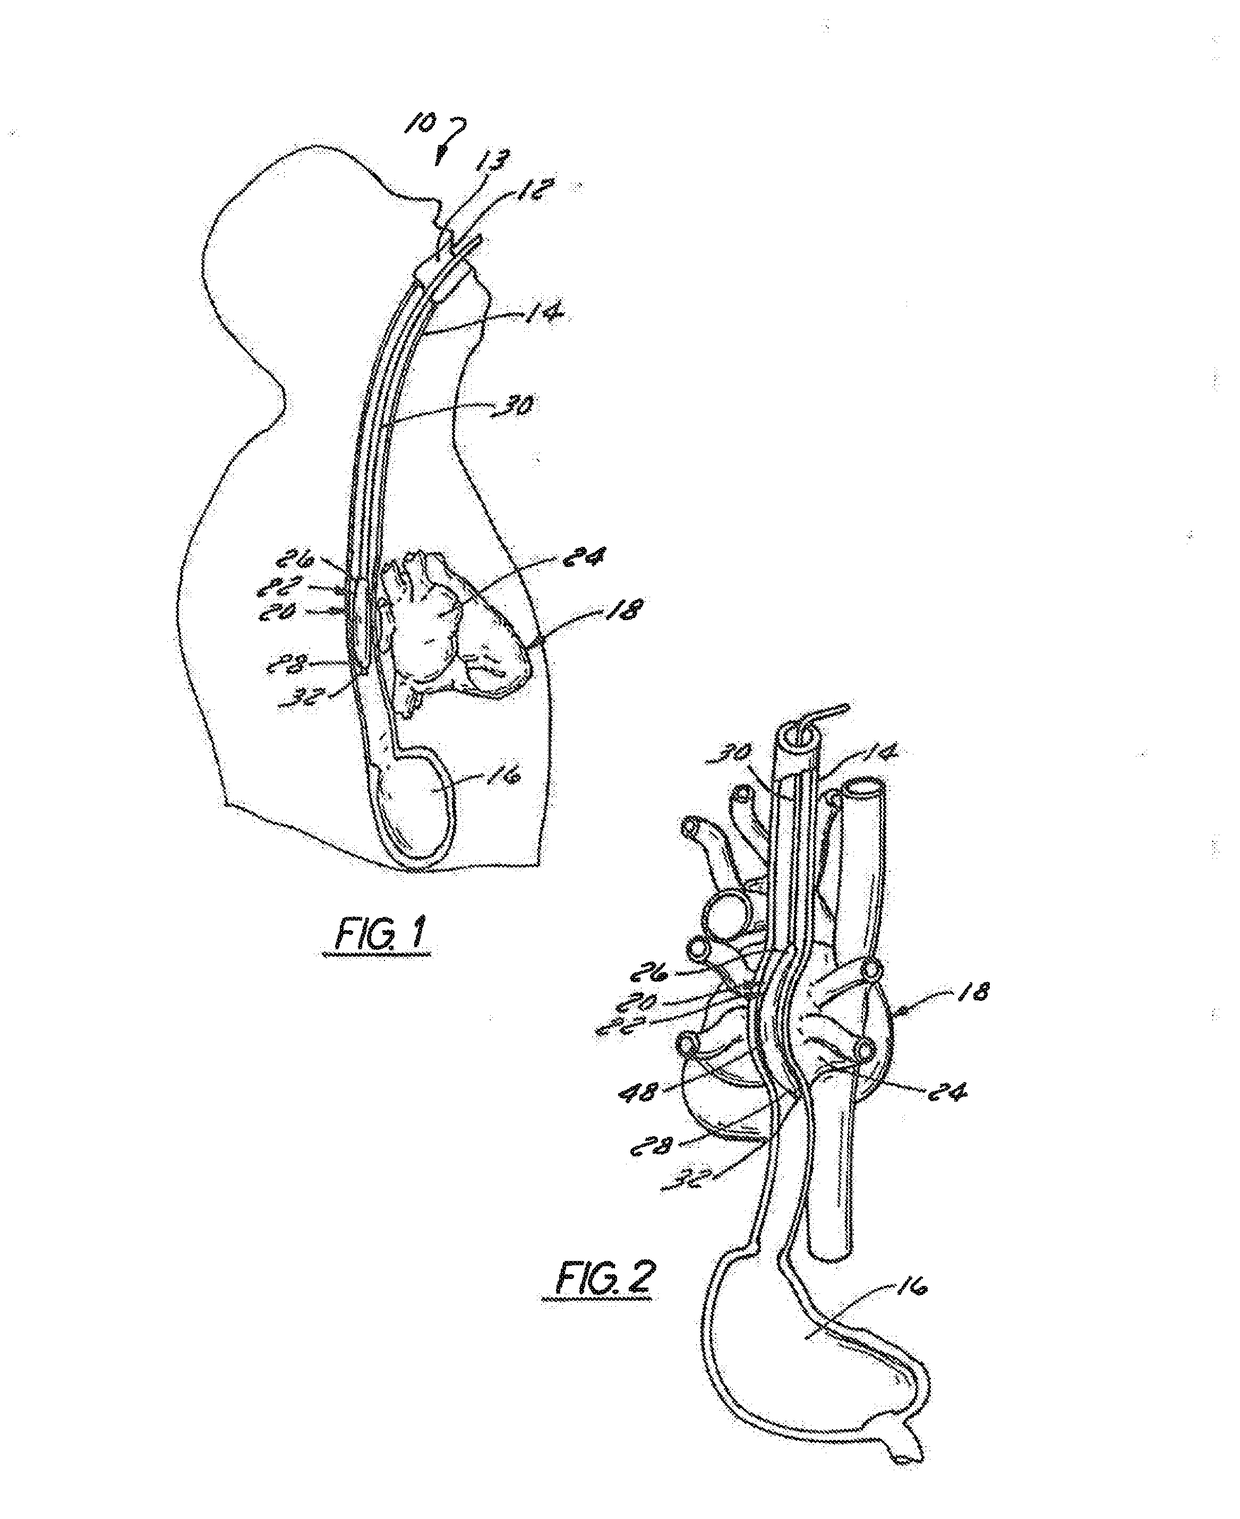 Method of Using an Intra-Esophageal Balloon System